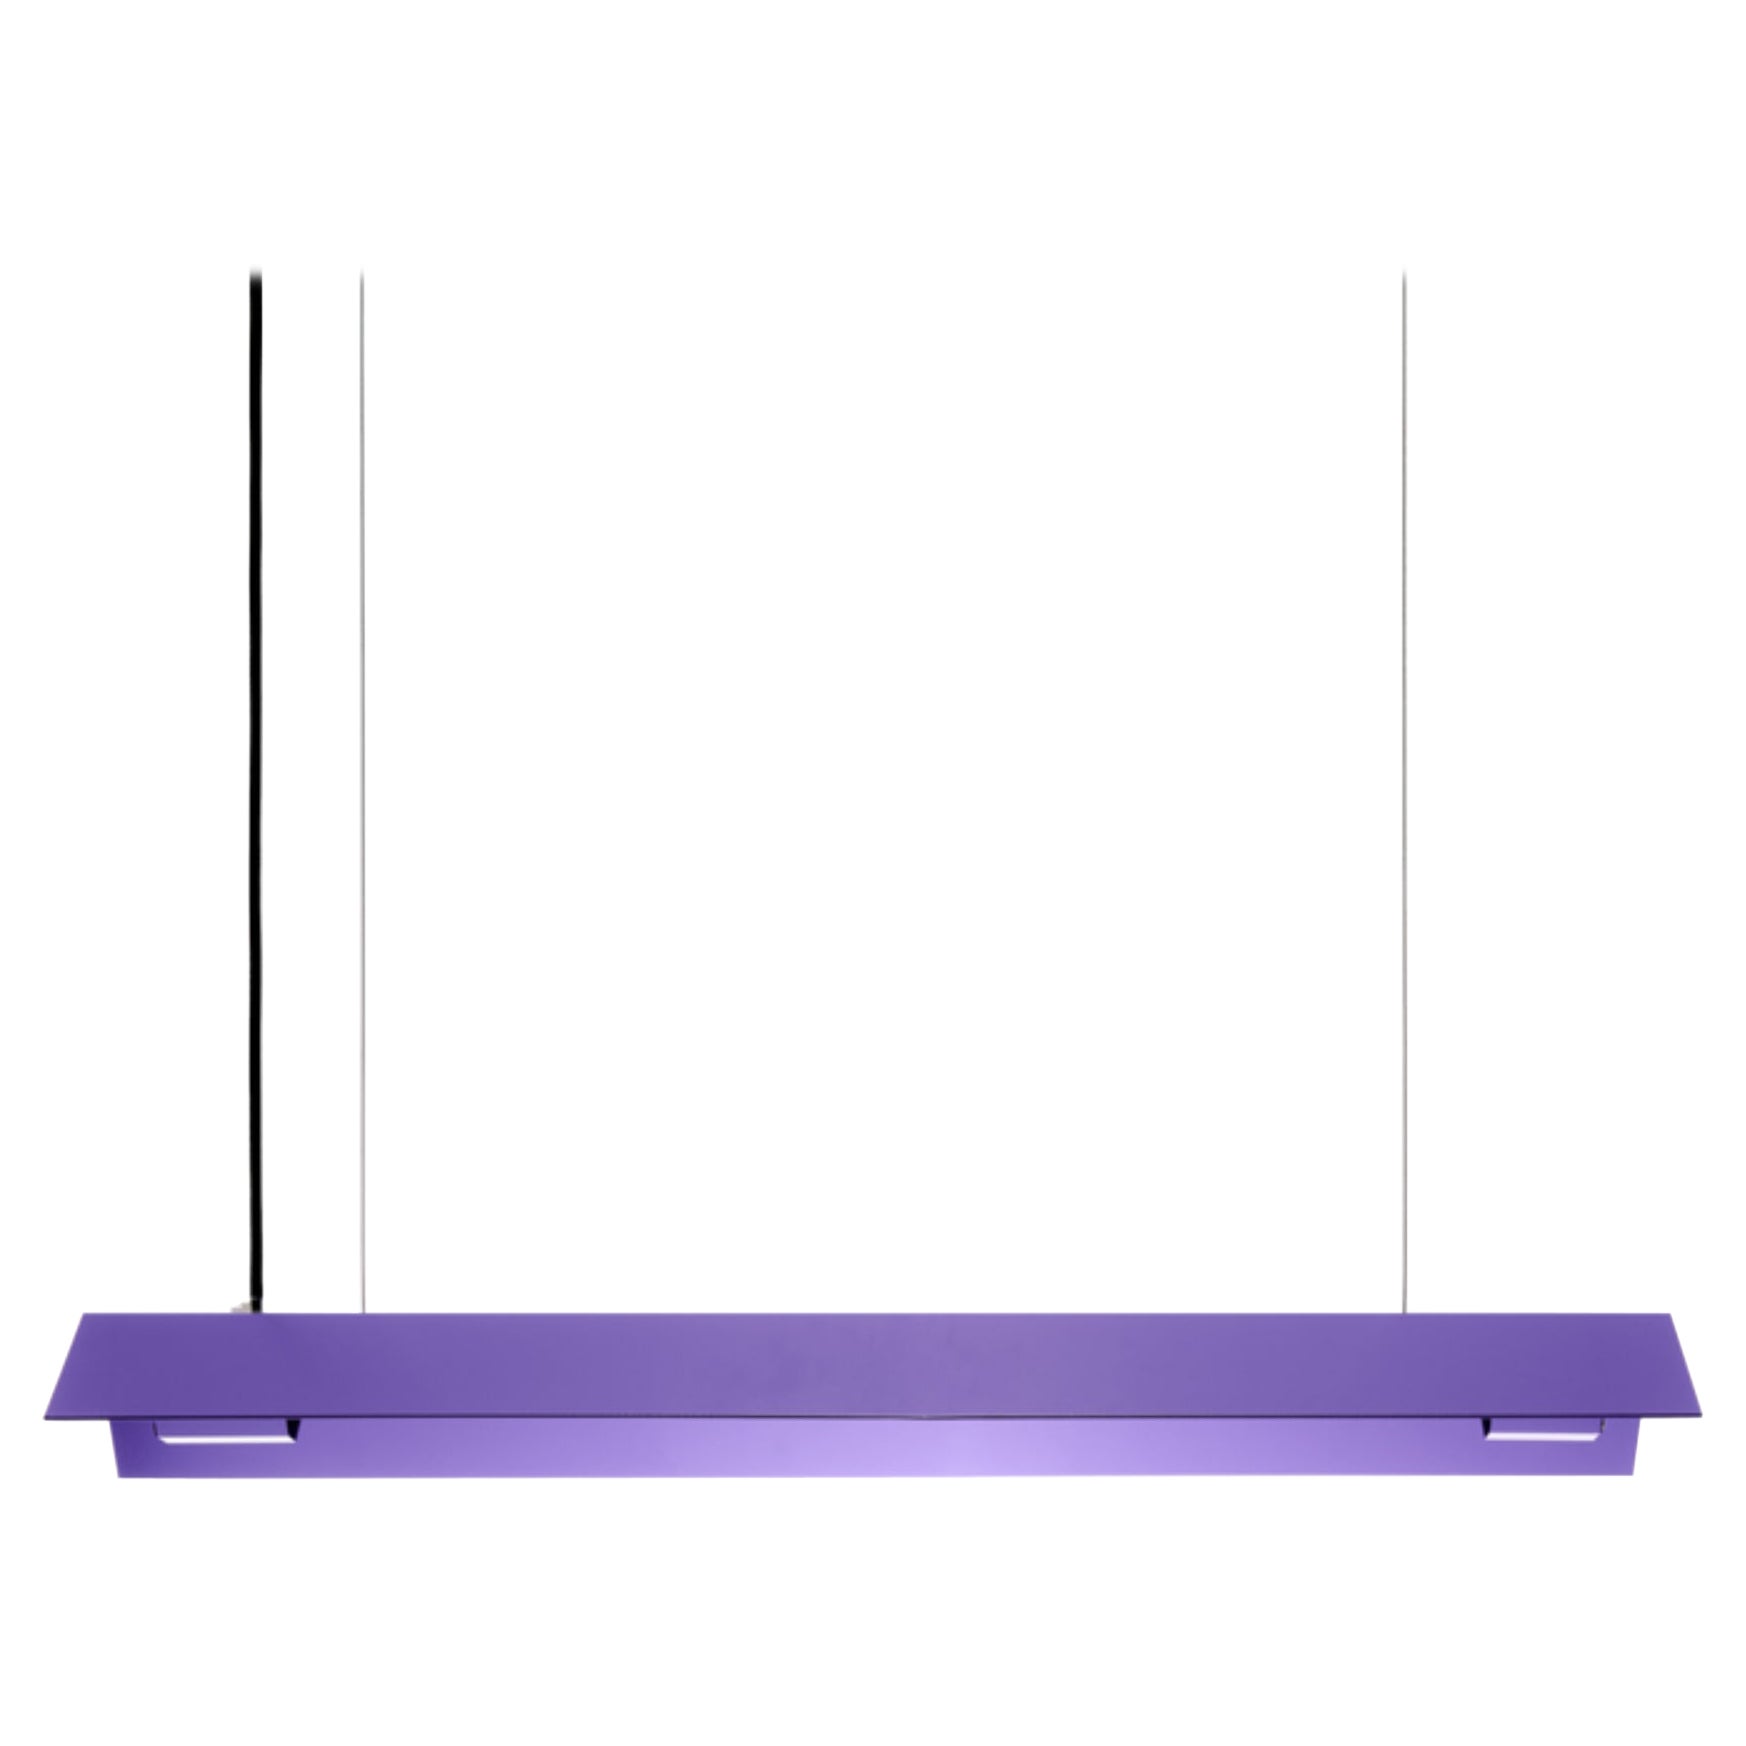 Large Misalliance Ral Lavender Suspended Light by Lexavala For Sale